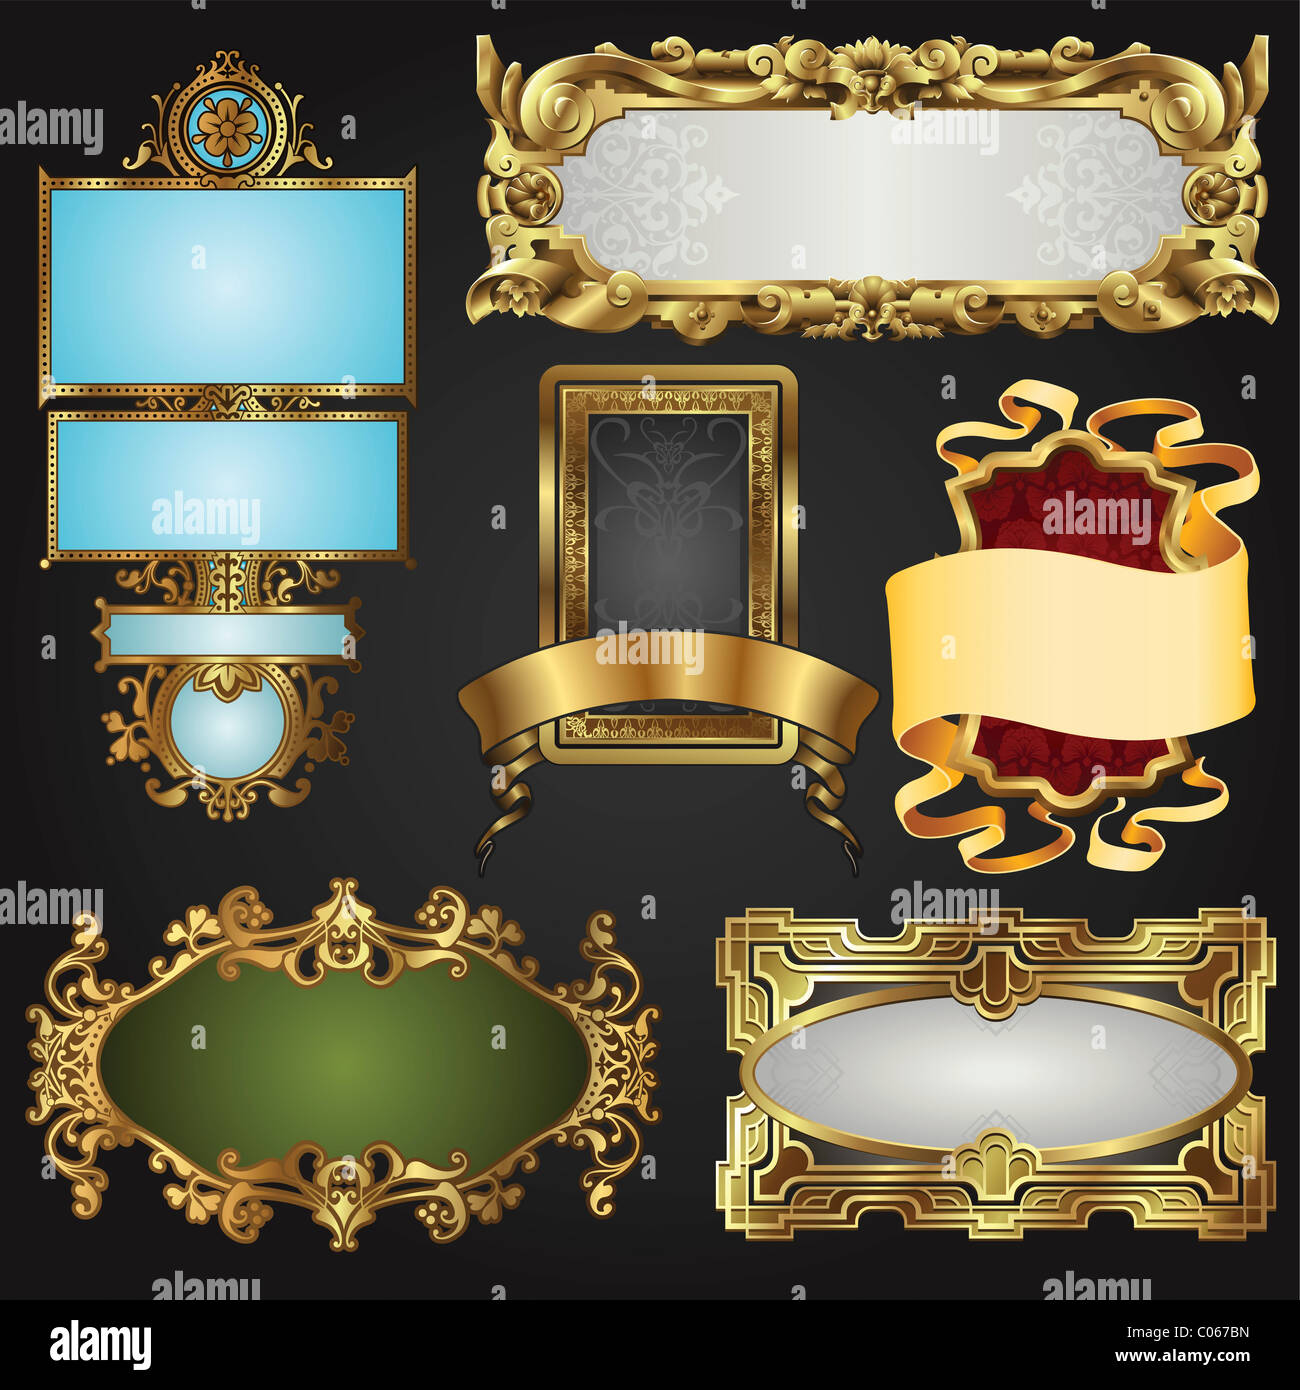 Vintage retro glossy gold frames and labels in a variety of retro antique styles. Stock Photo